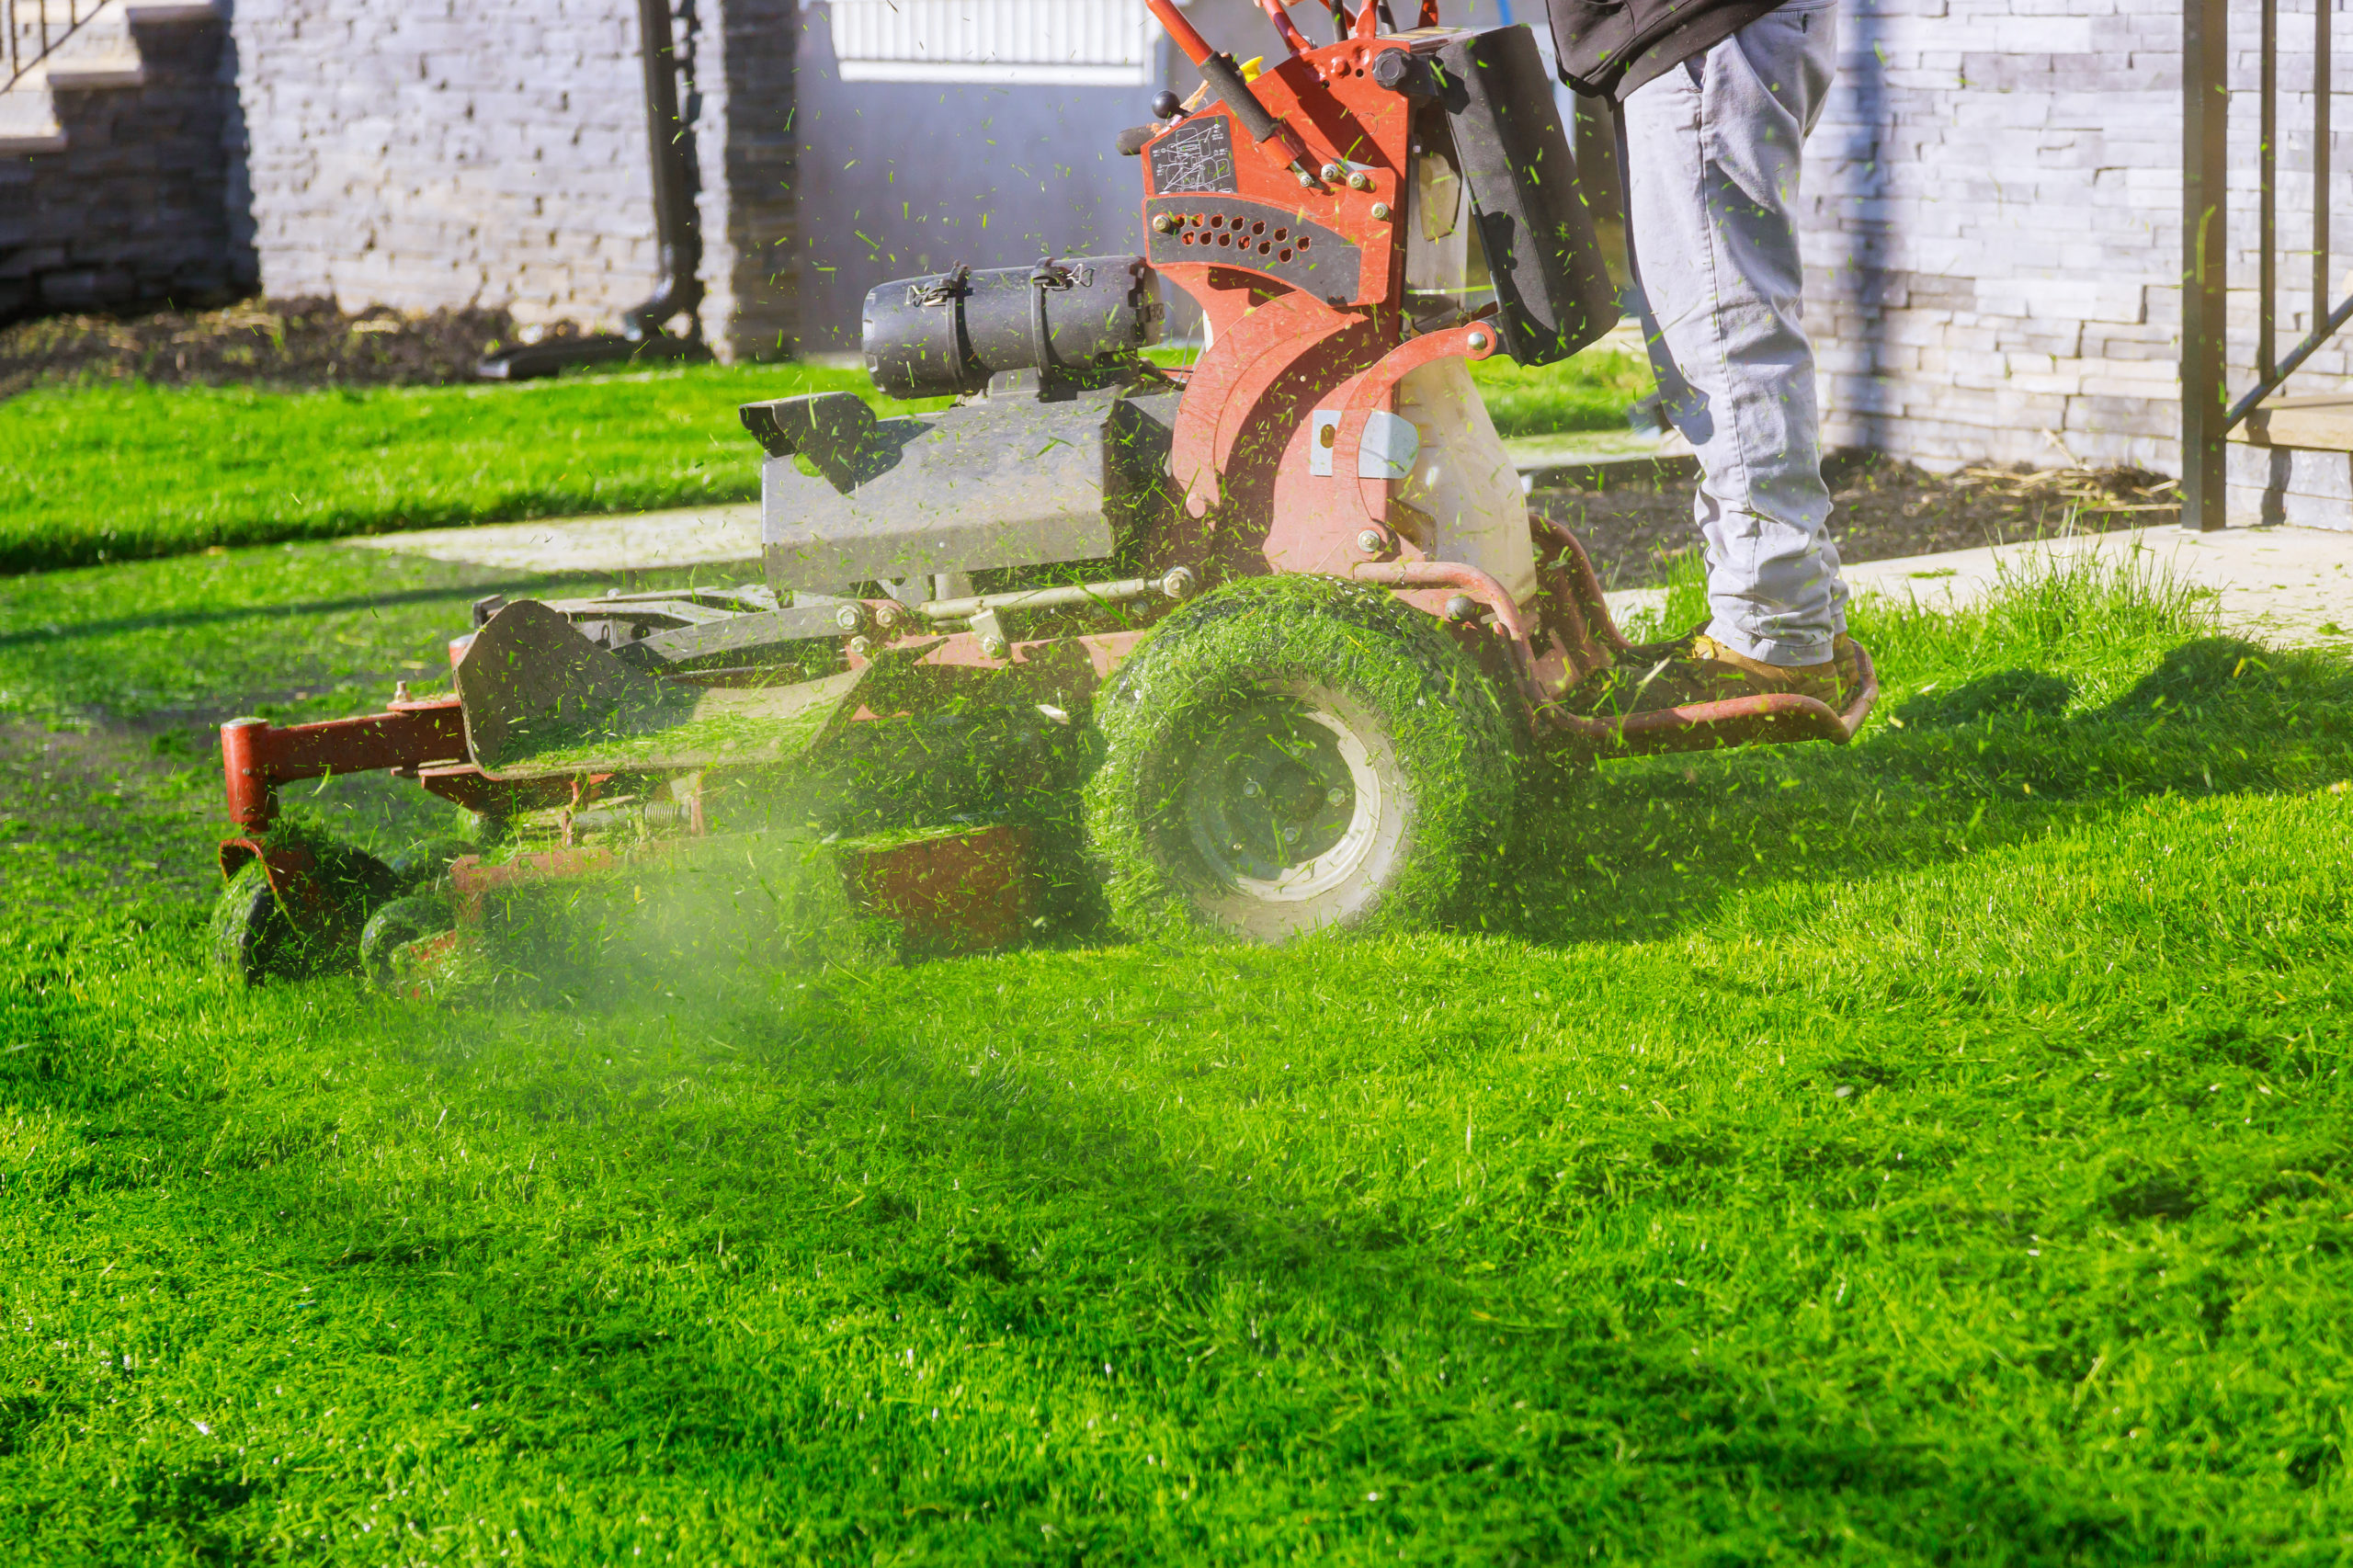 Commercial Lawn Care Equipment Maintenance at Legacy Feed & Fuel